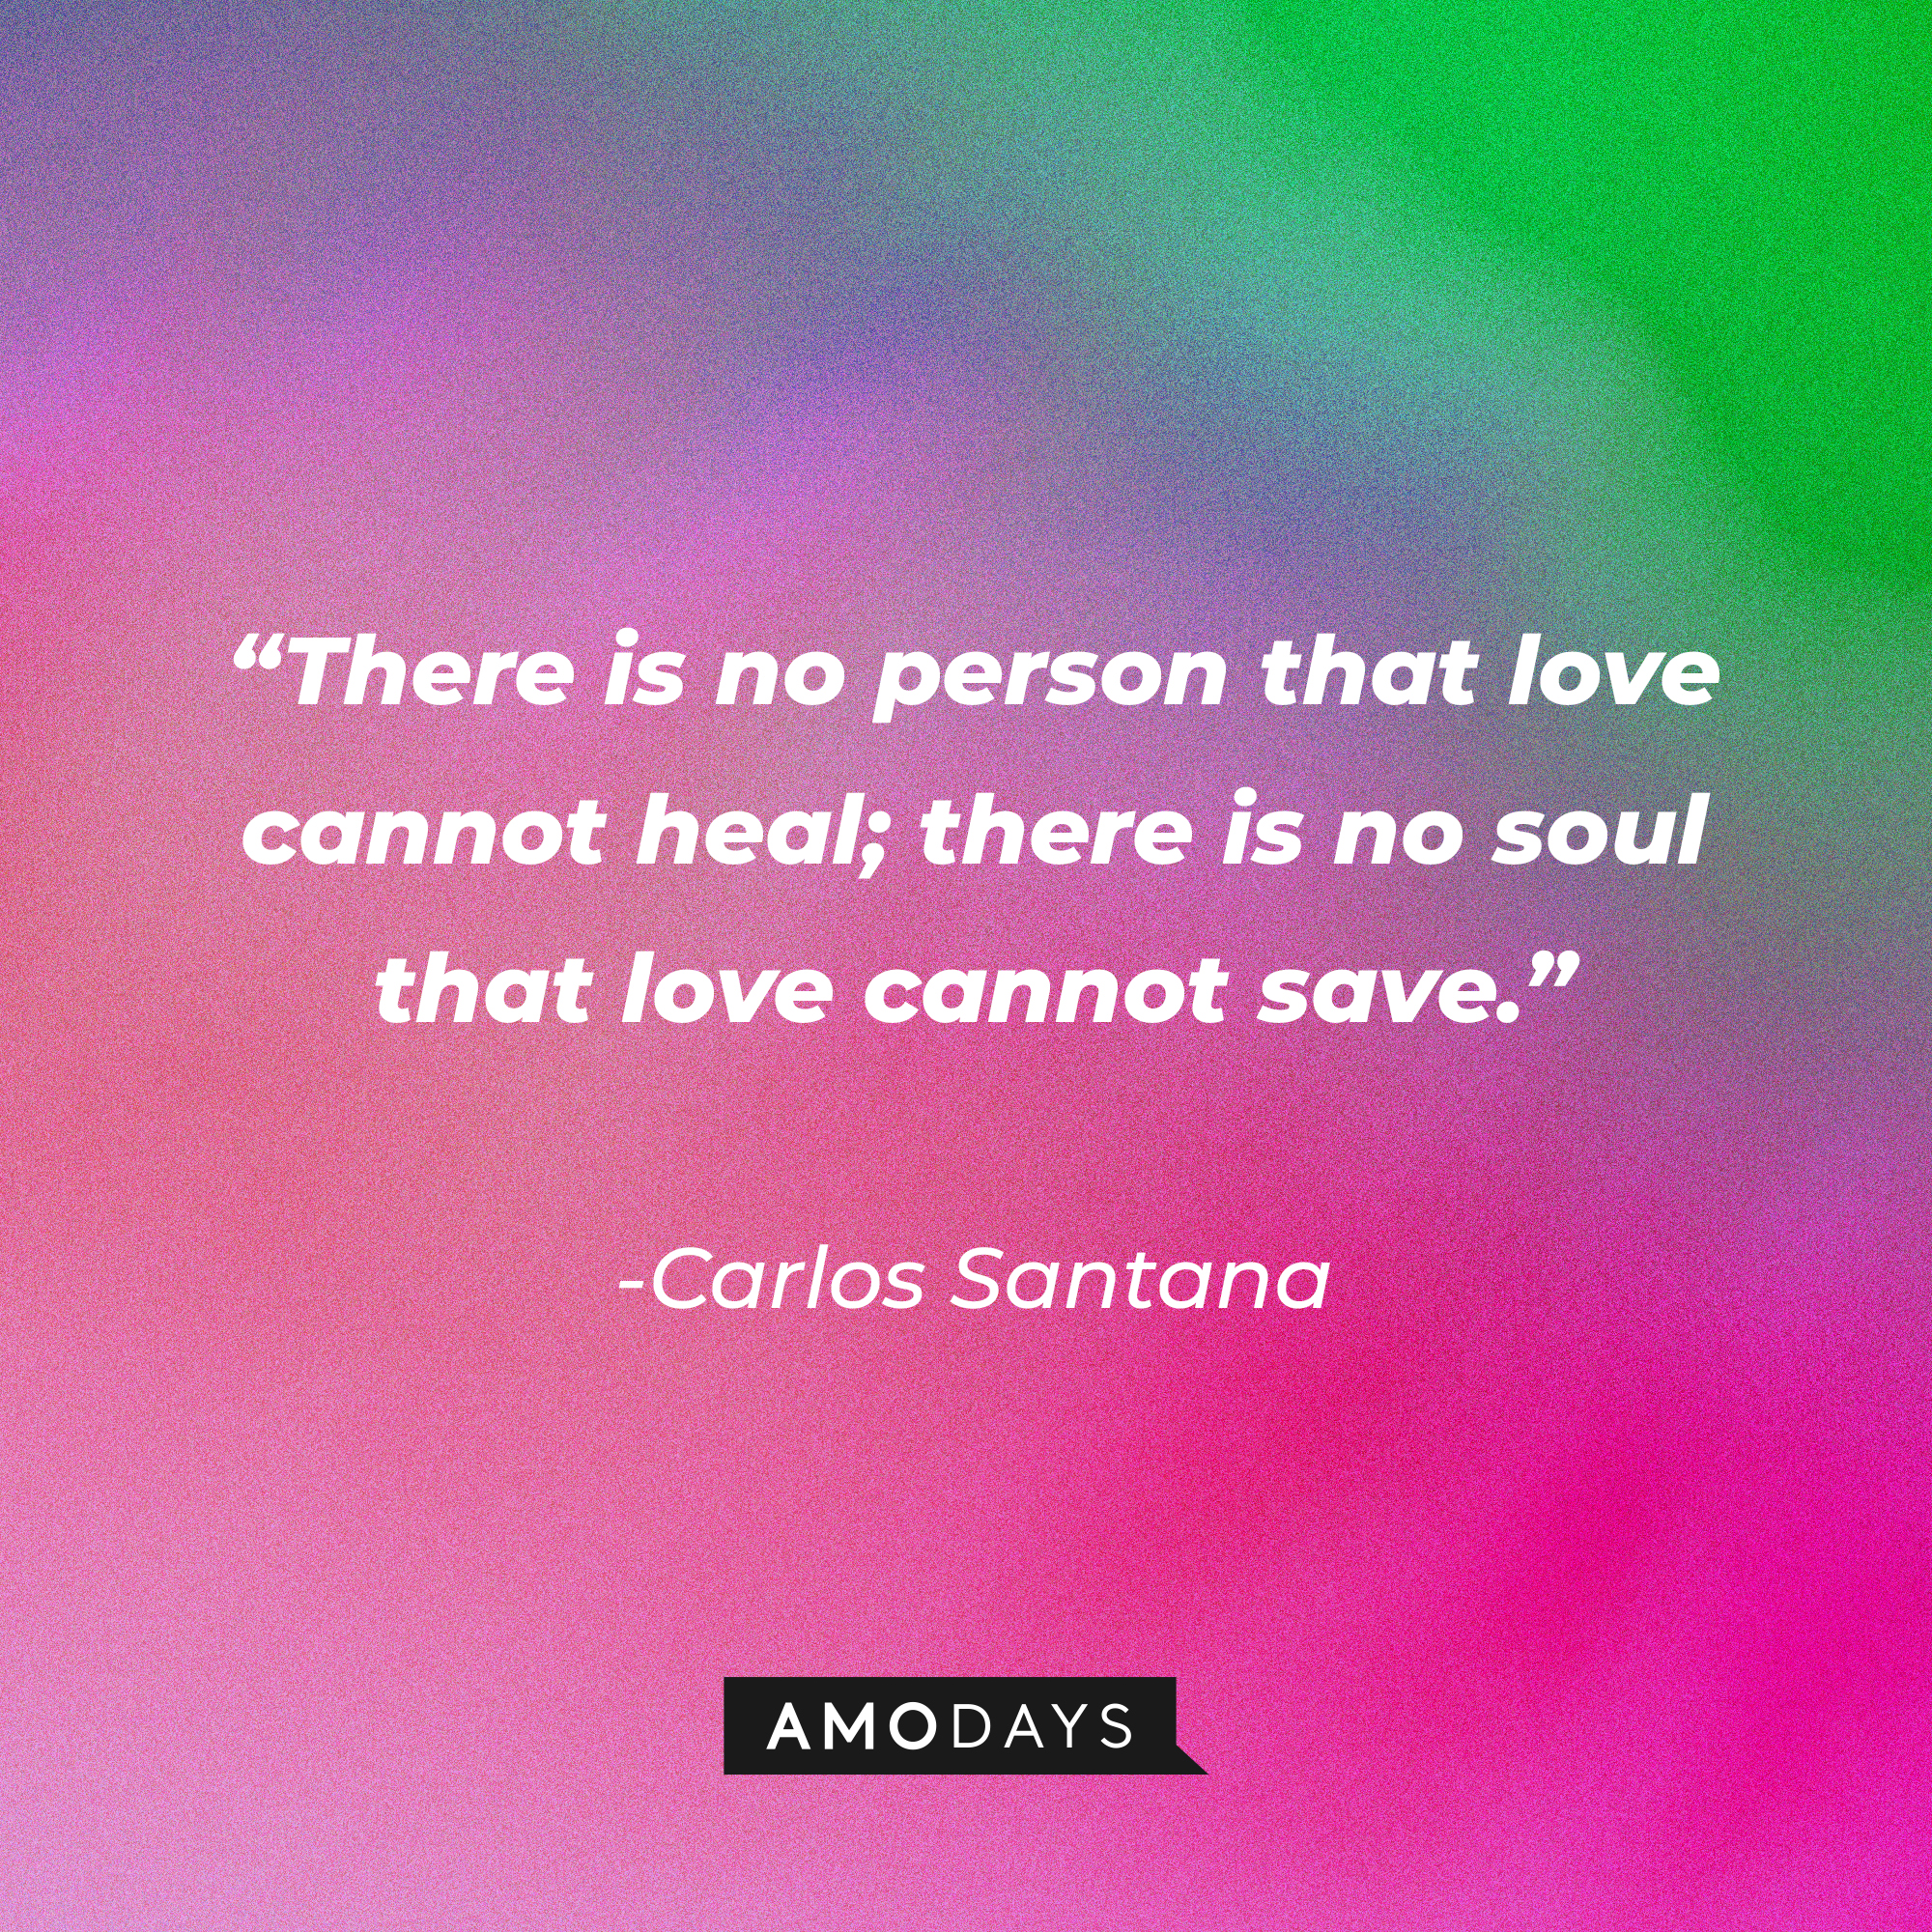 Carlos Santana’s quote: There is no person that love cannot heal; there is no soul that love cannot save." ┃Source: AmoDays